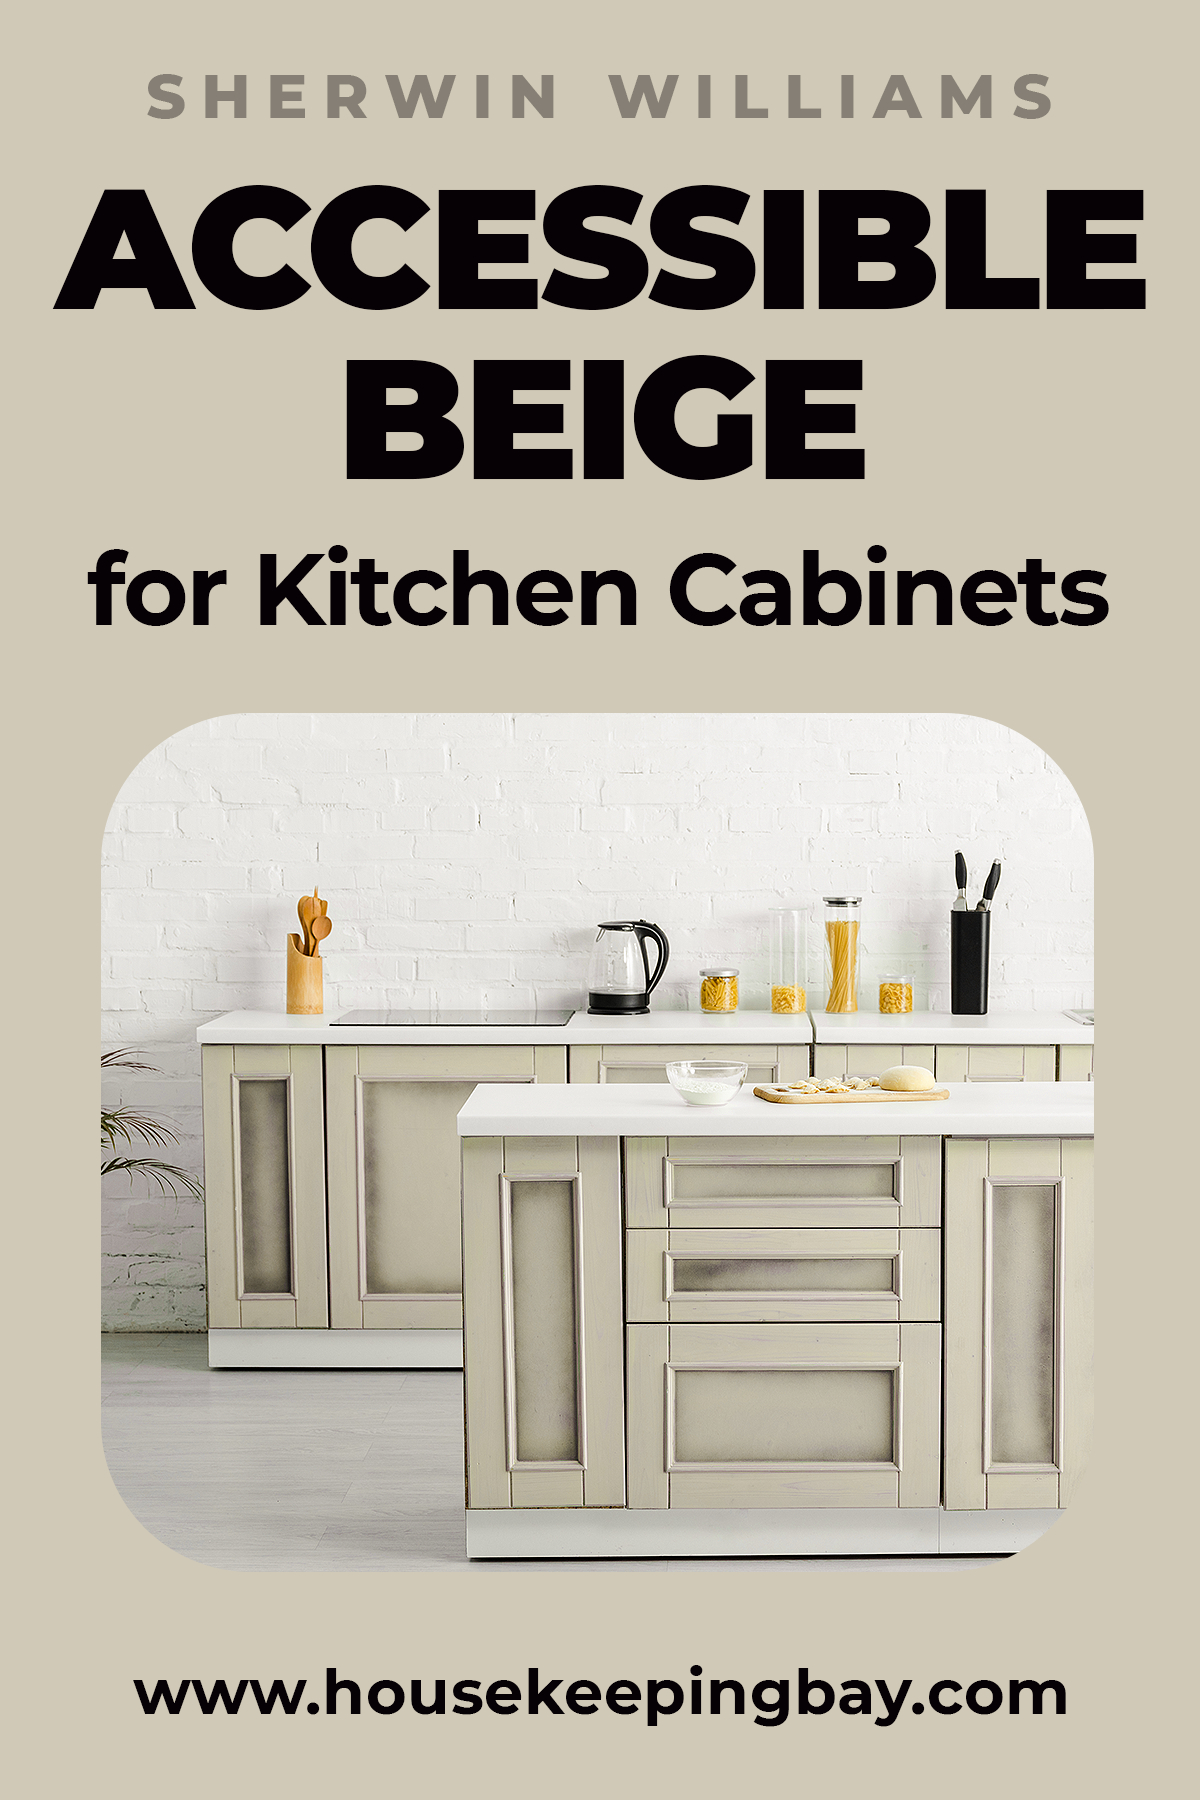 Accessible Beige for Kitchen Cabinets